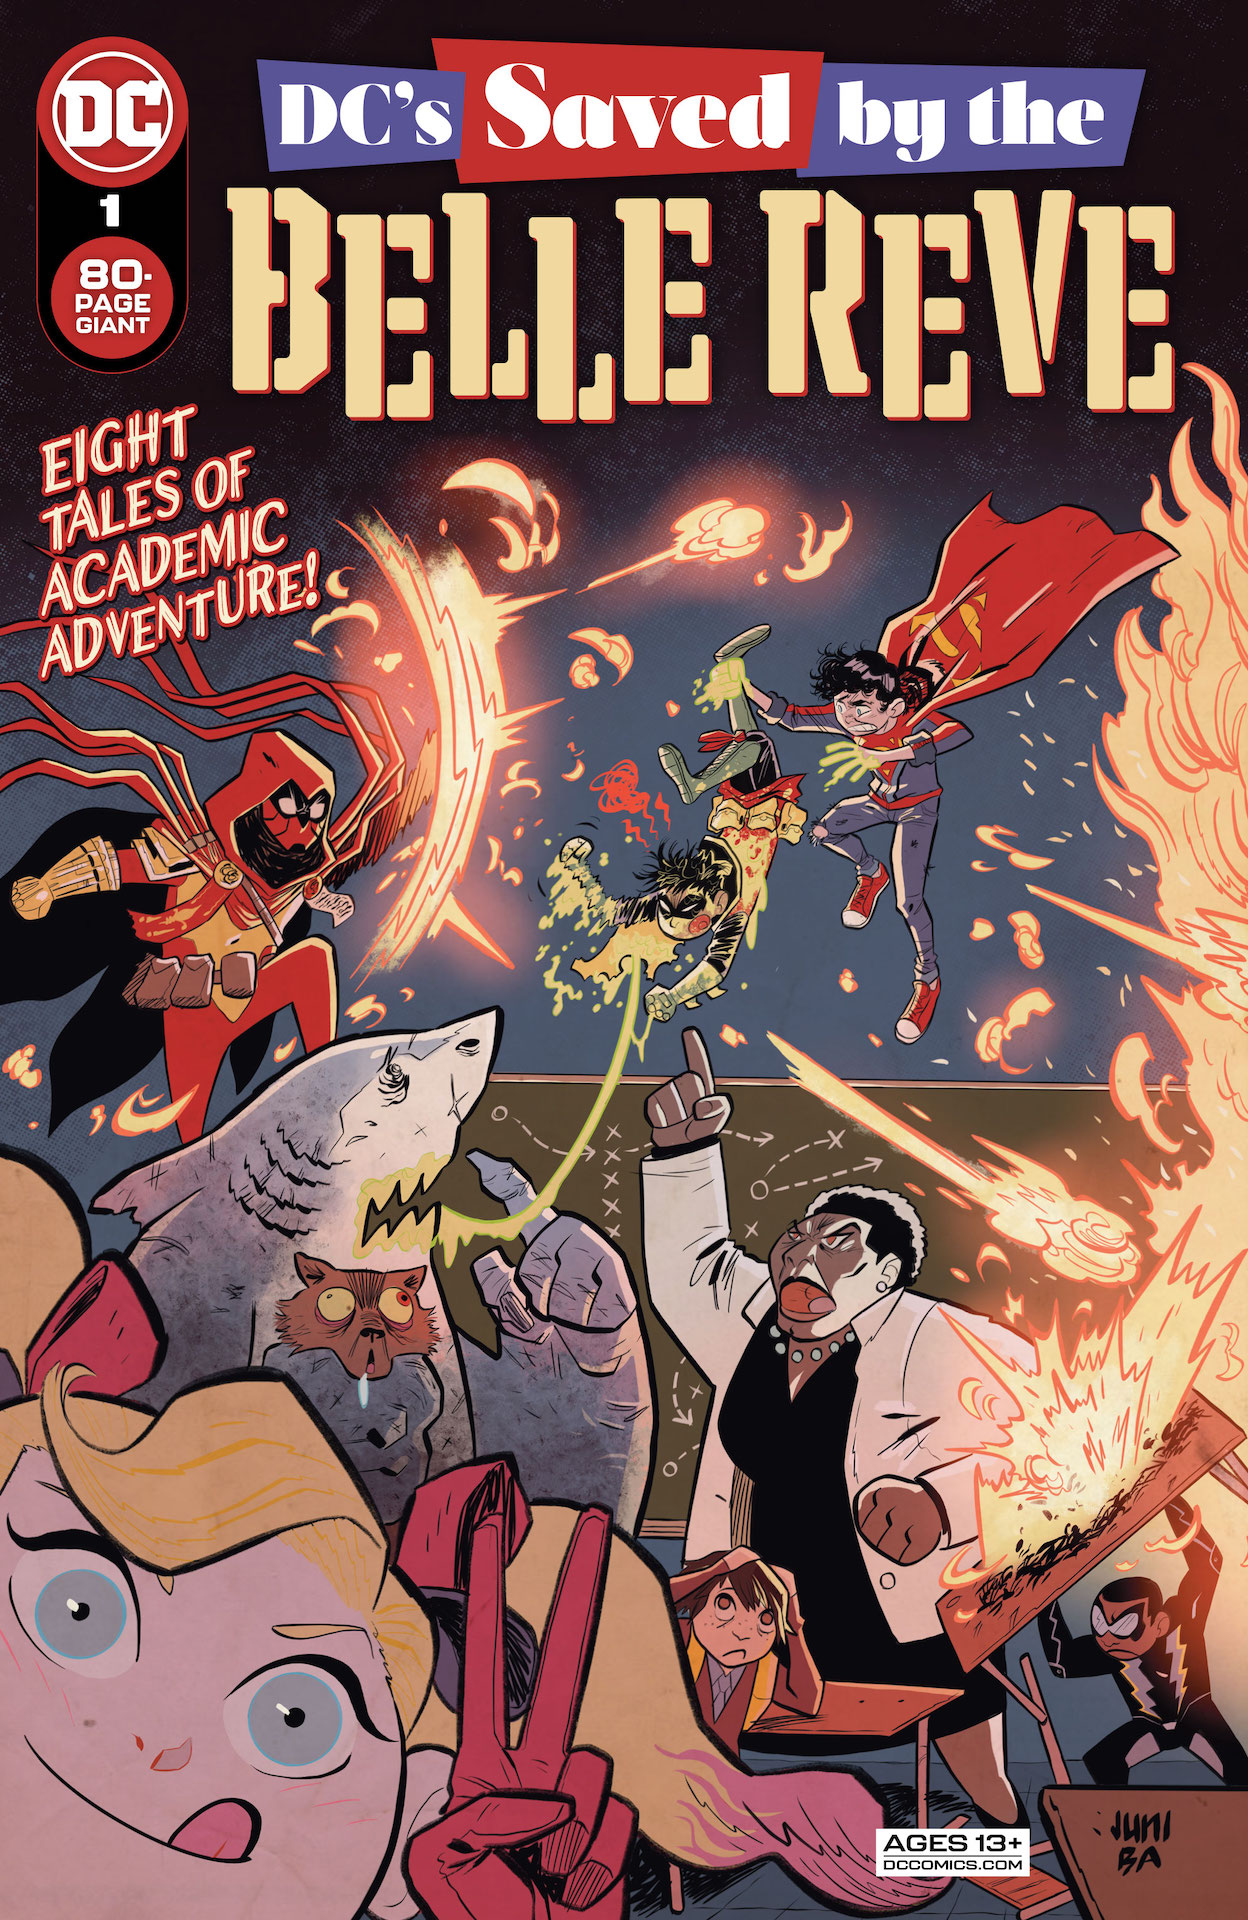 DC Preview: DC Saved By The Belle Reve #1